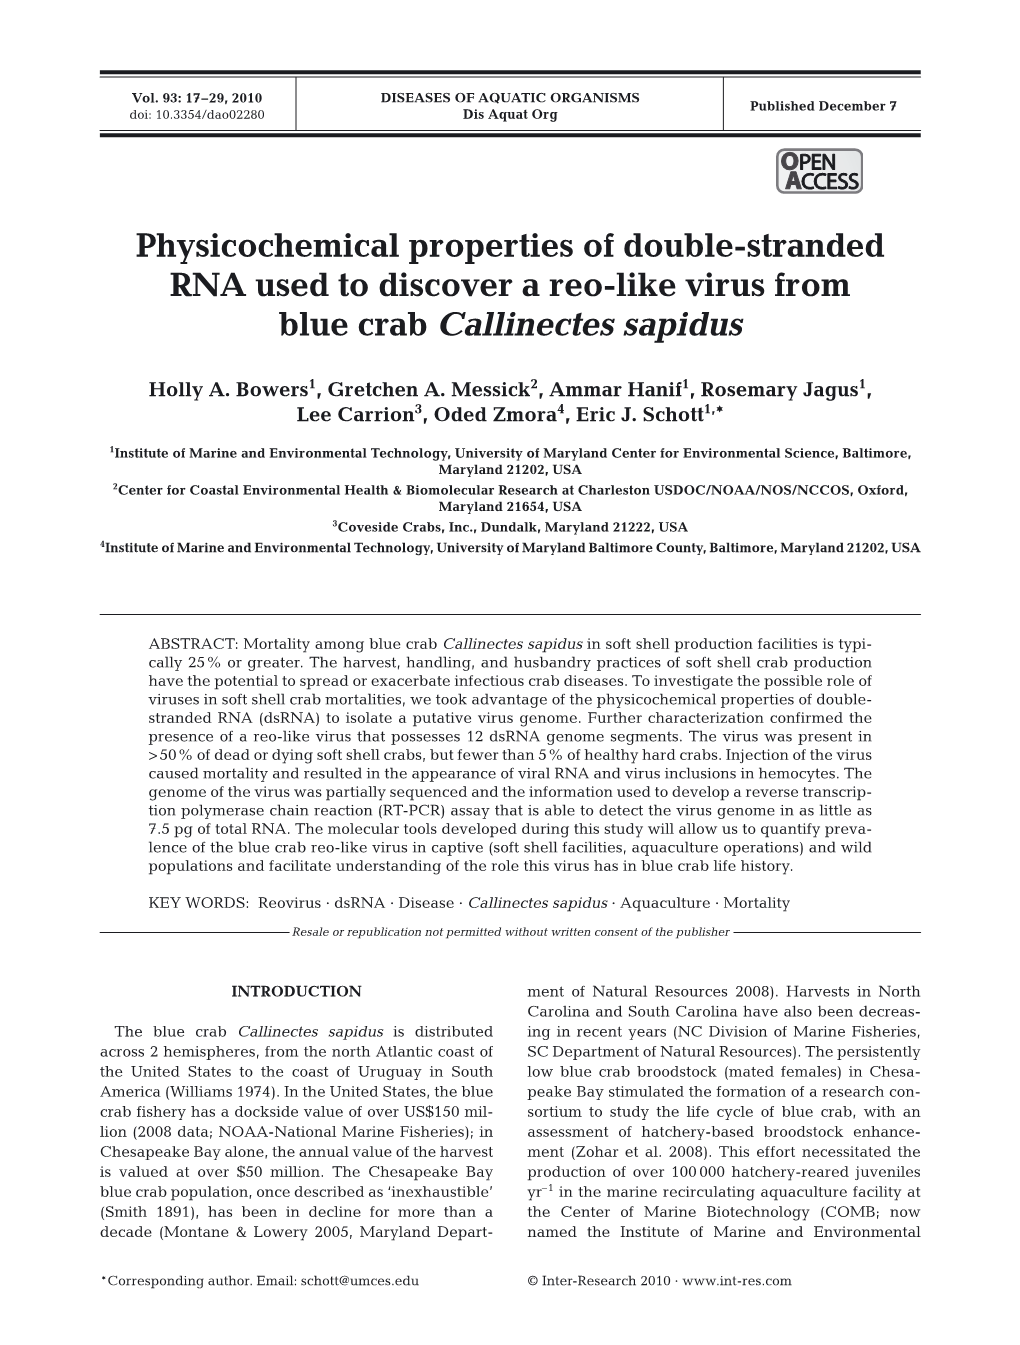 Physicochemical Properties of Double-Stranded RNA Used to Discover a Reo-Like Virus from Blue Crab Callinectes Sapidus